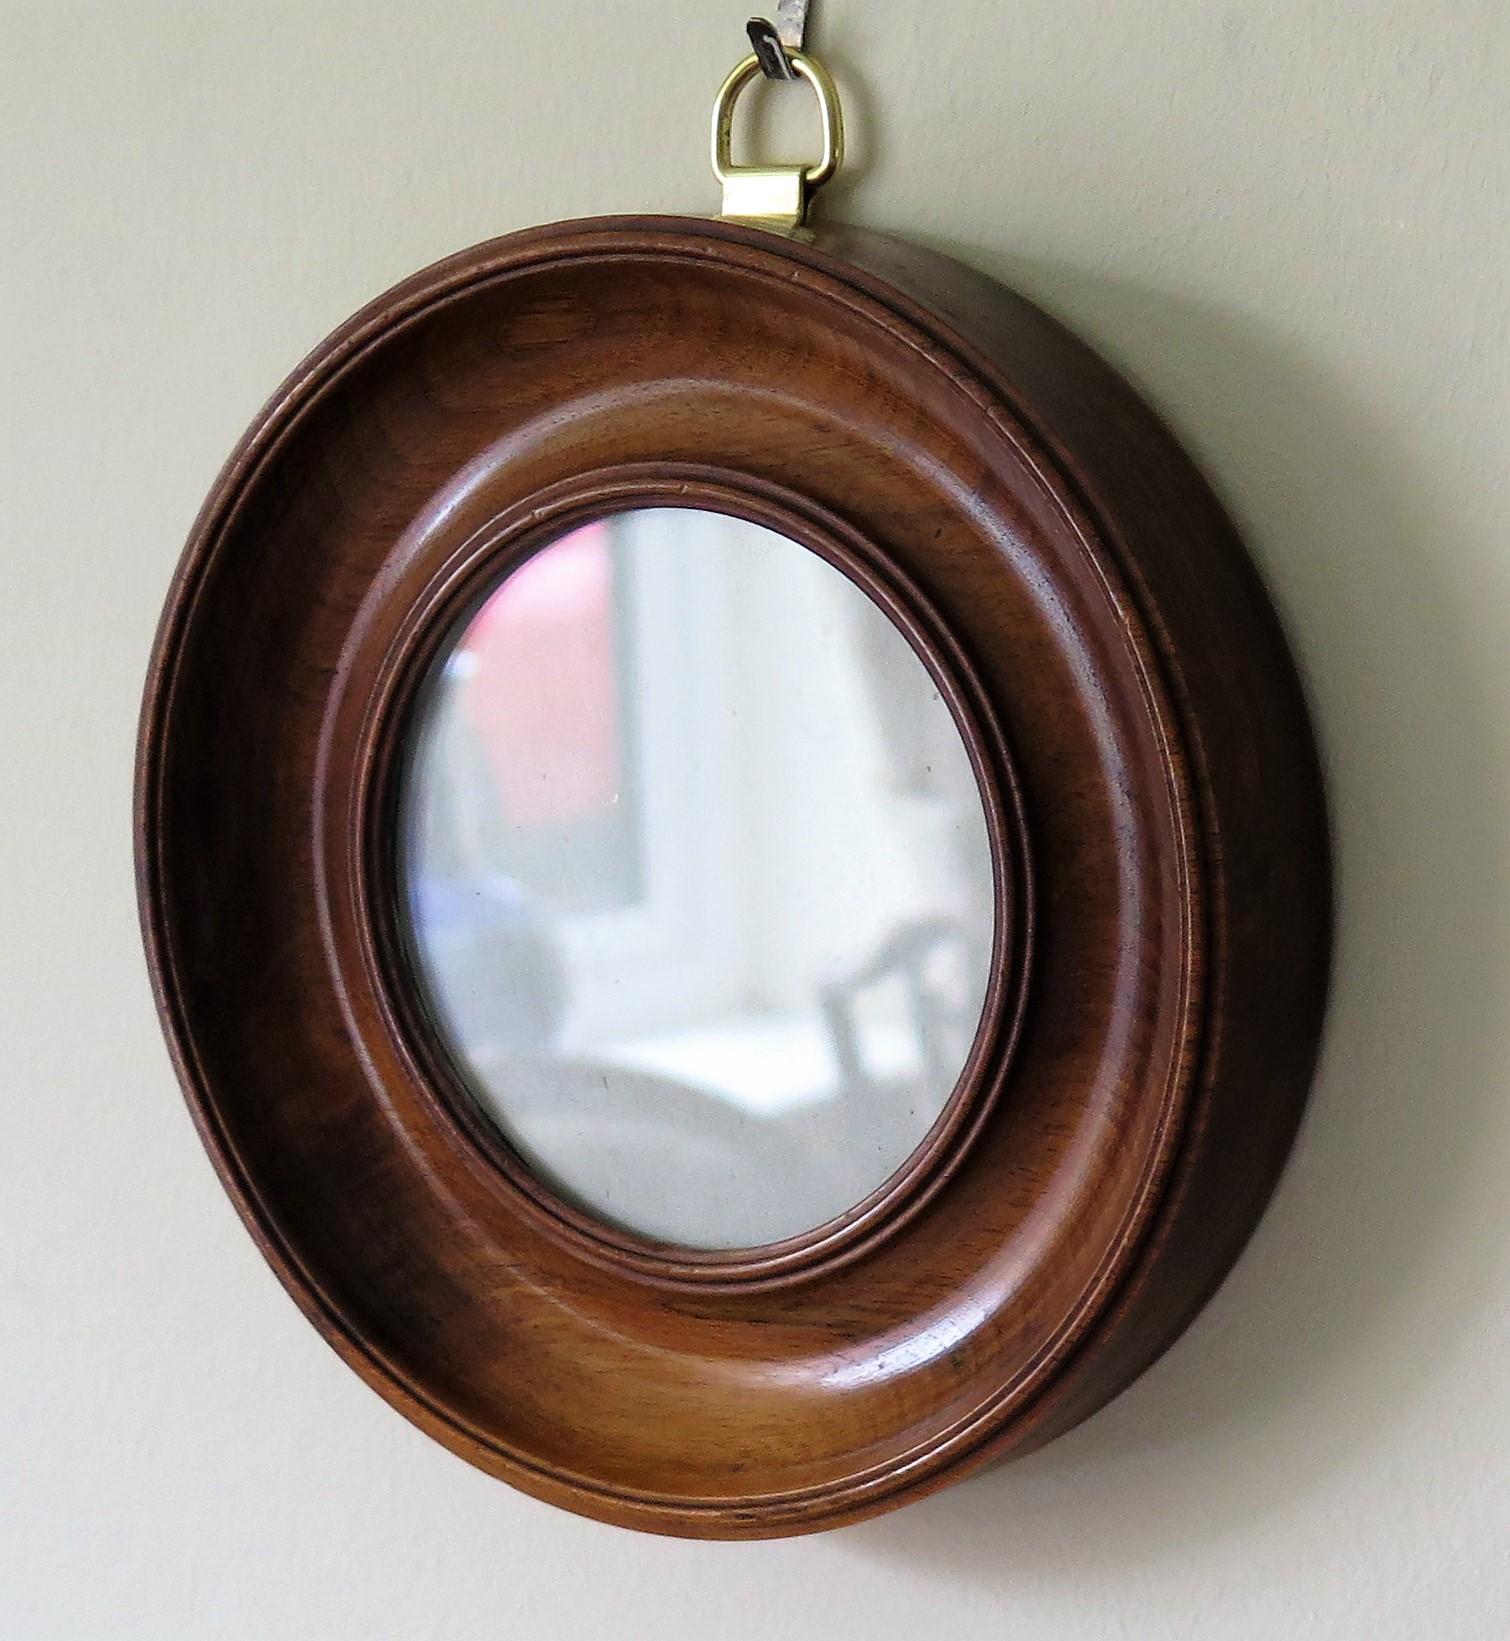 English 19th Century Small Picture or Photo Frame Hand Turned Mahogany Wall Hanging